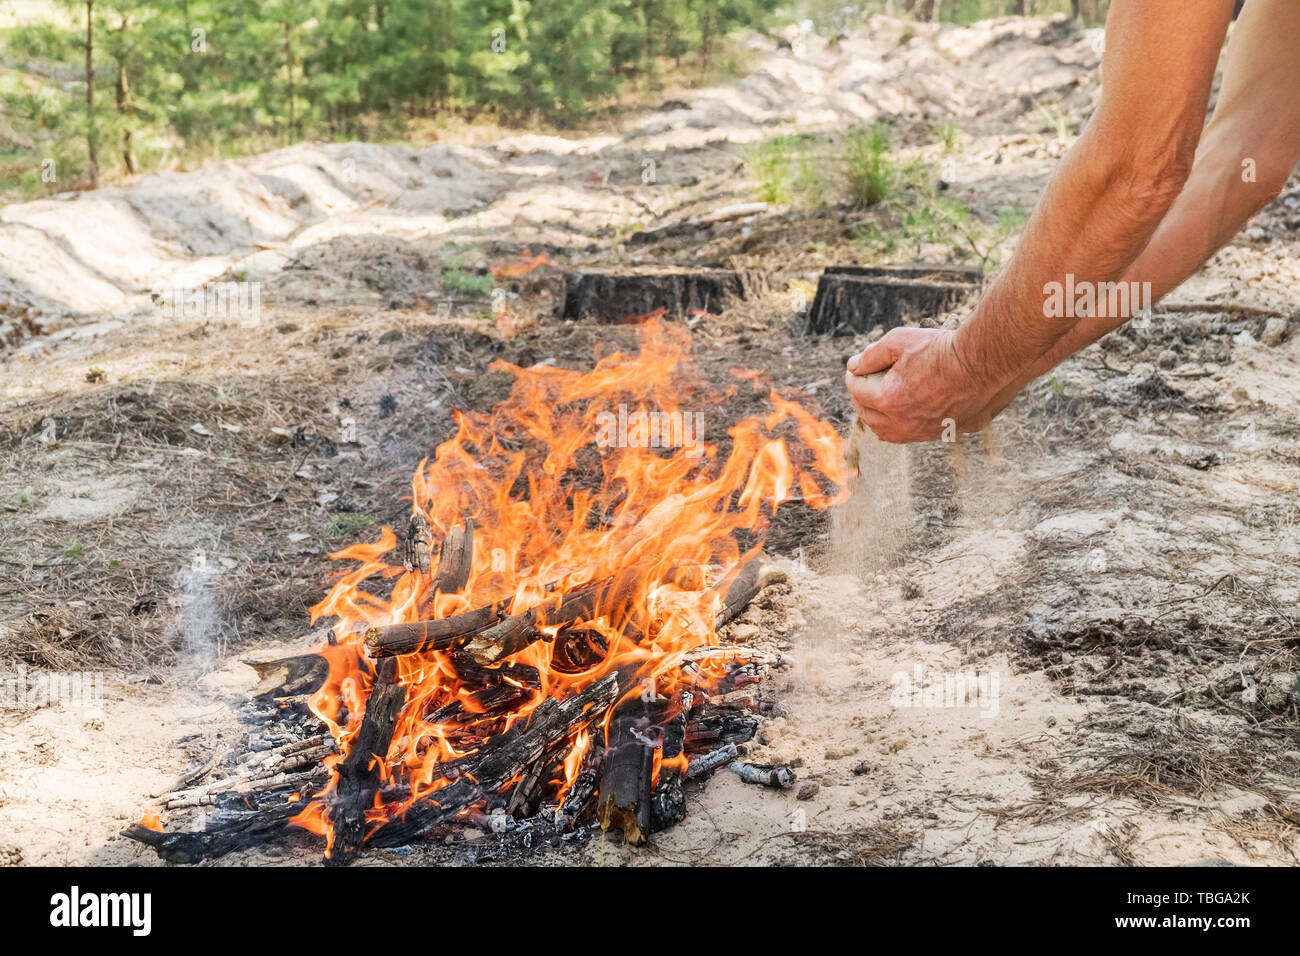 Man Putting Out A Fire With Sand Stock Photo Alamy